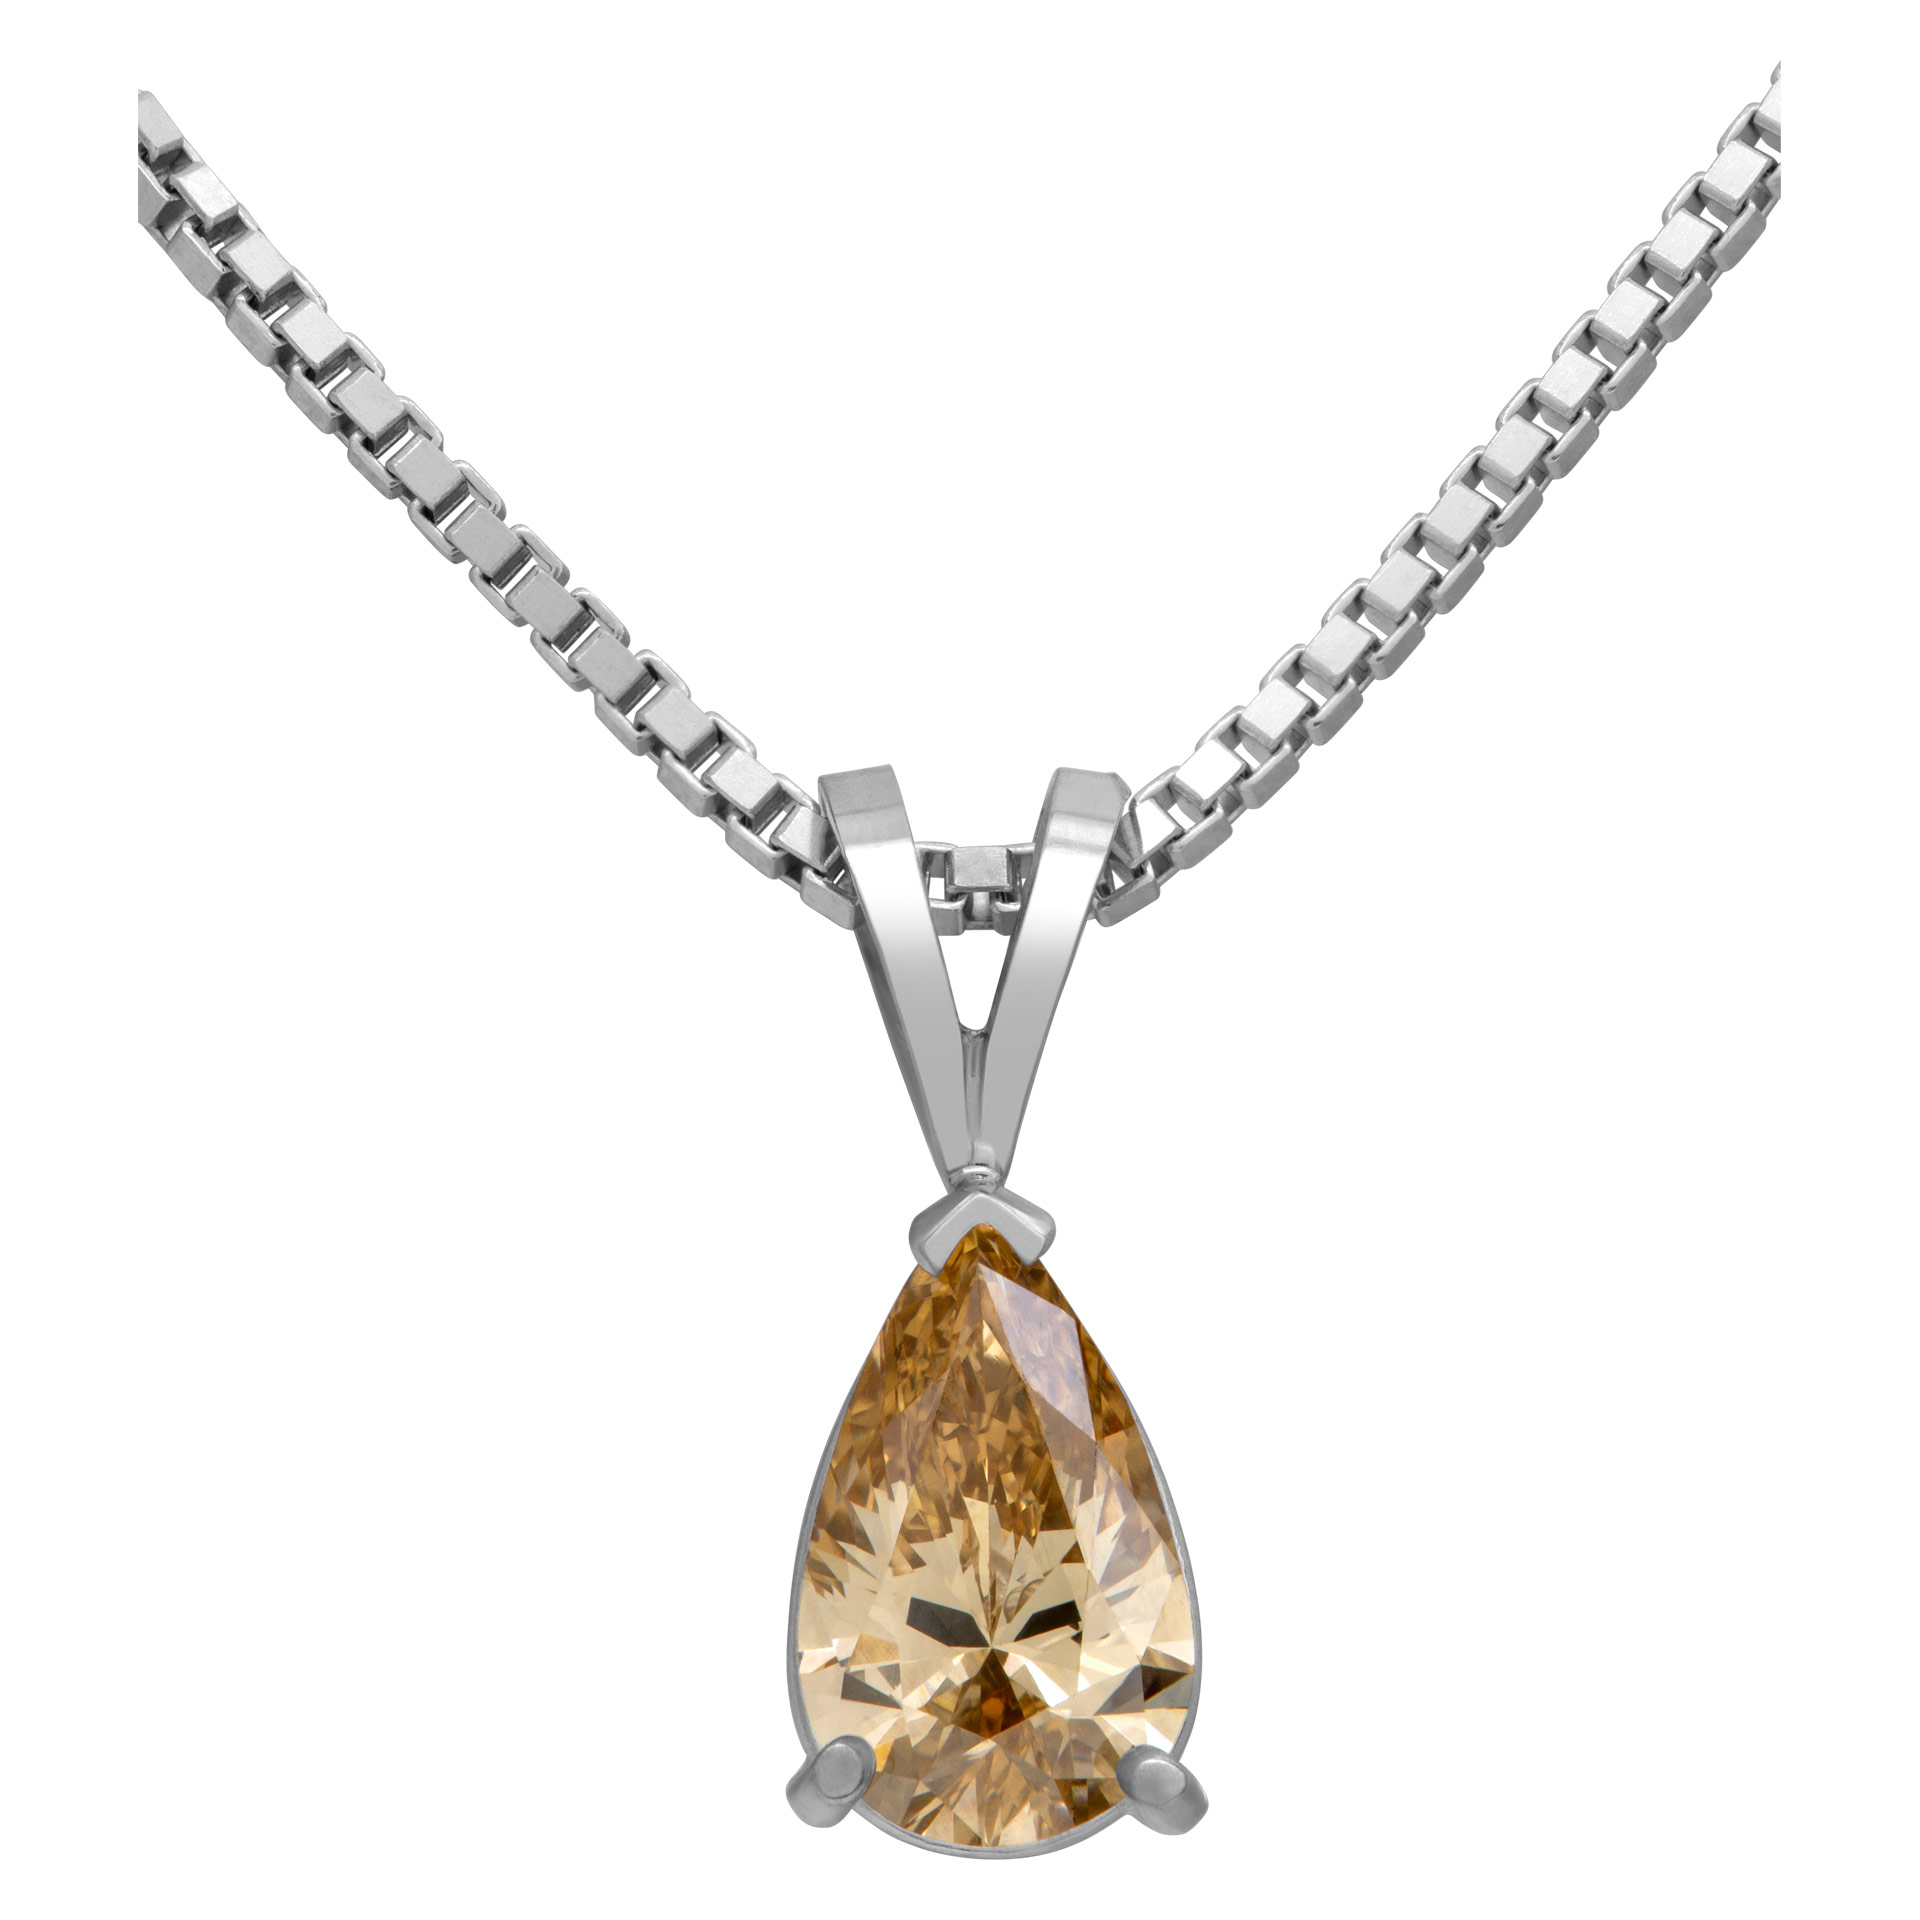 GIA certified 1.11 carat natural, fancy brown-yellow, even VS1 pear cut diamond on white gold pendant and chain .